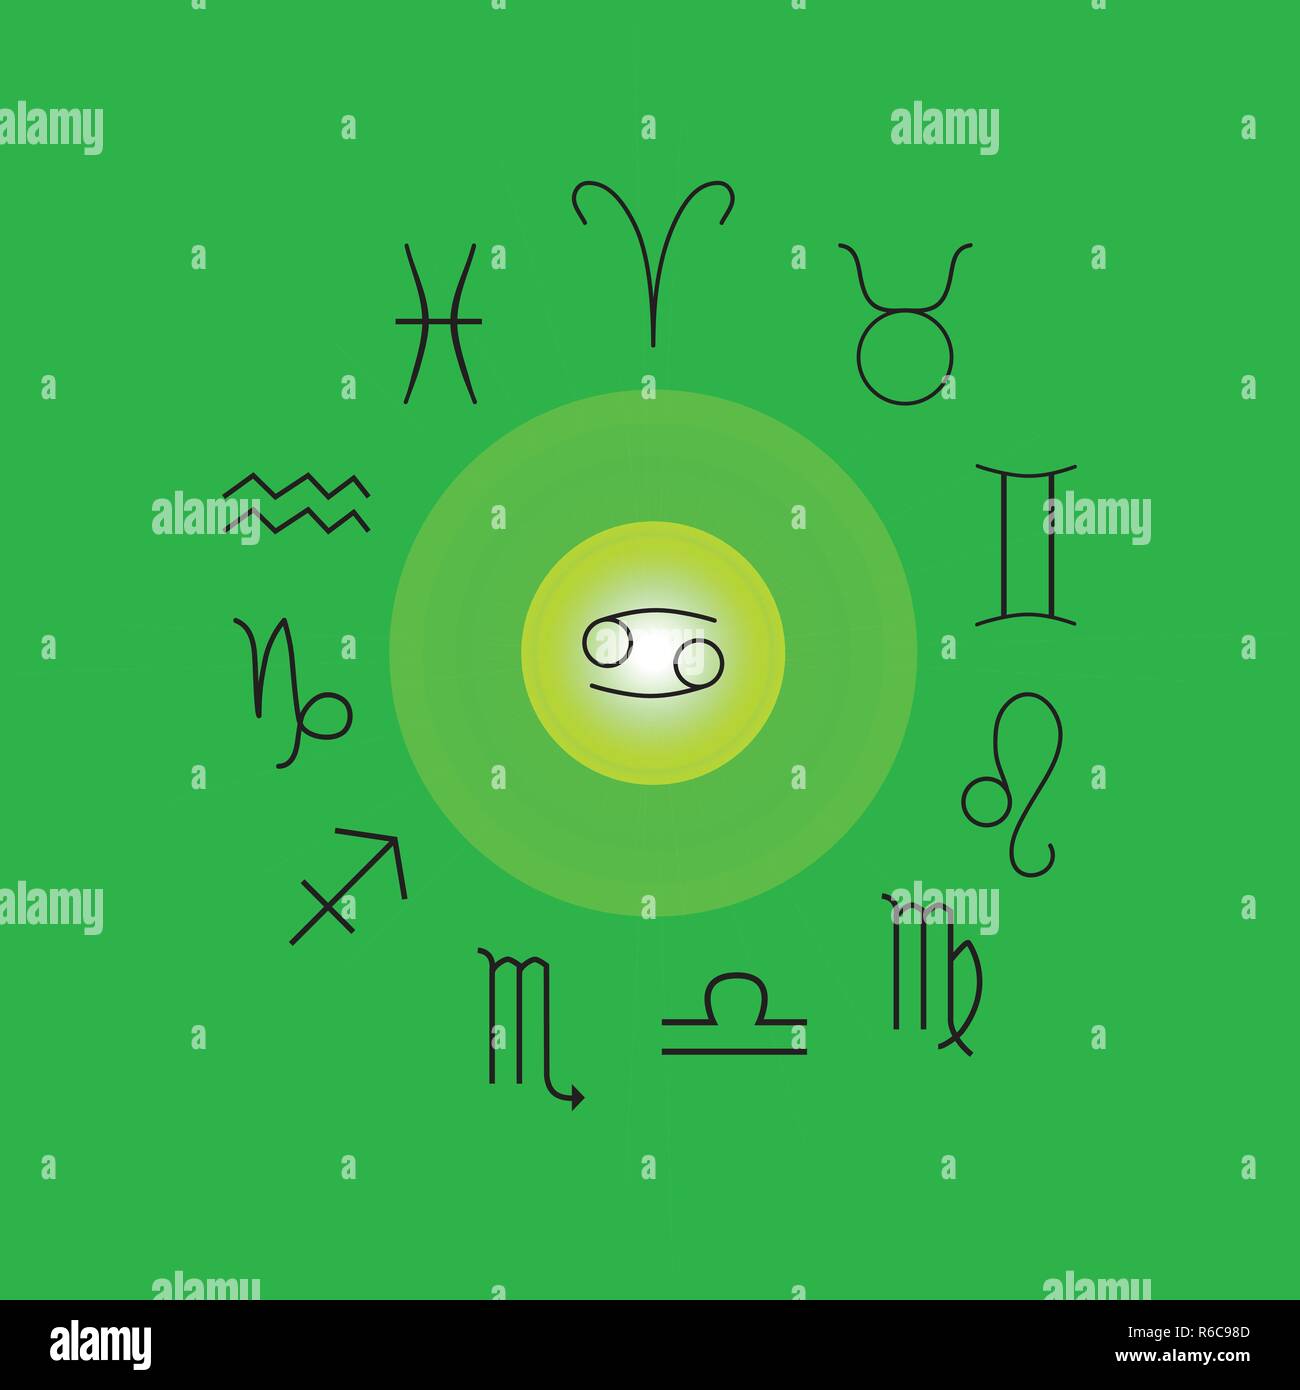 Astrological signs, Symbols of zodiac, horoscope, astrology and mystic signs vector illustration on a green background Stock Vector